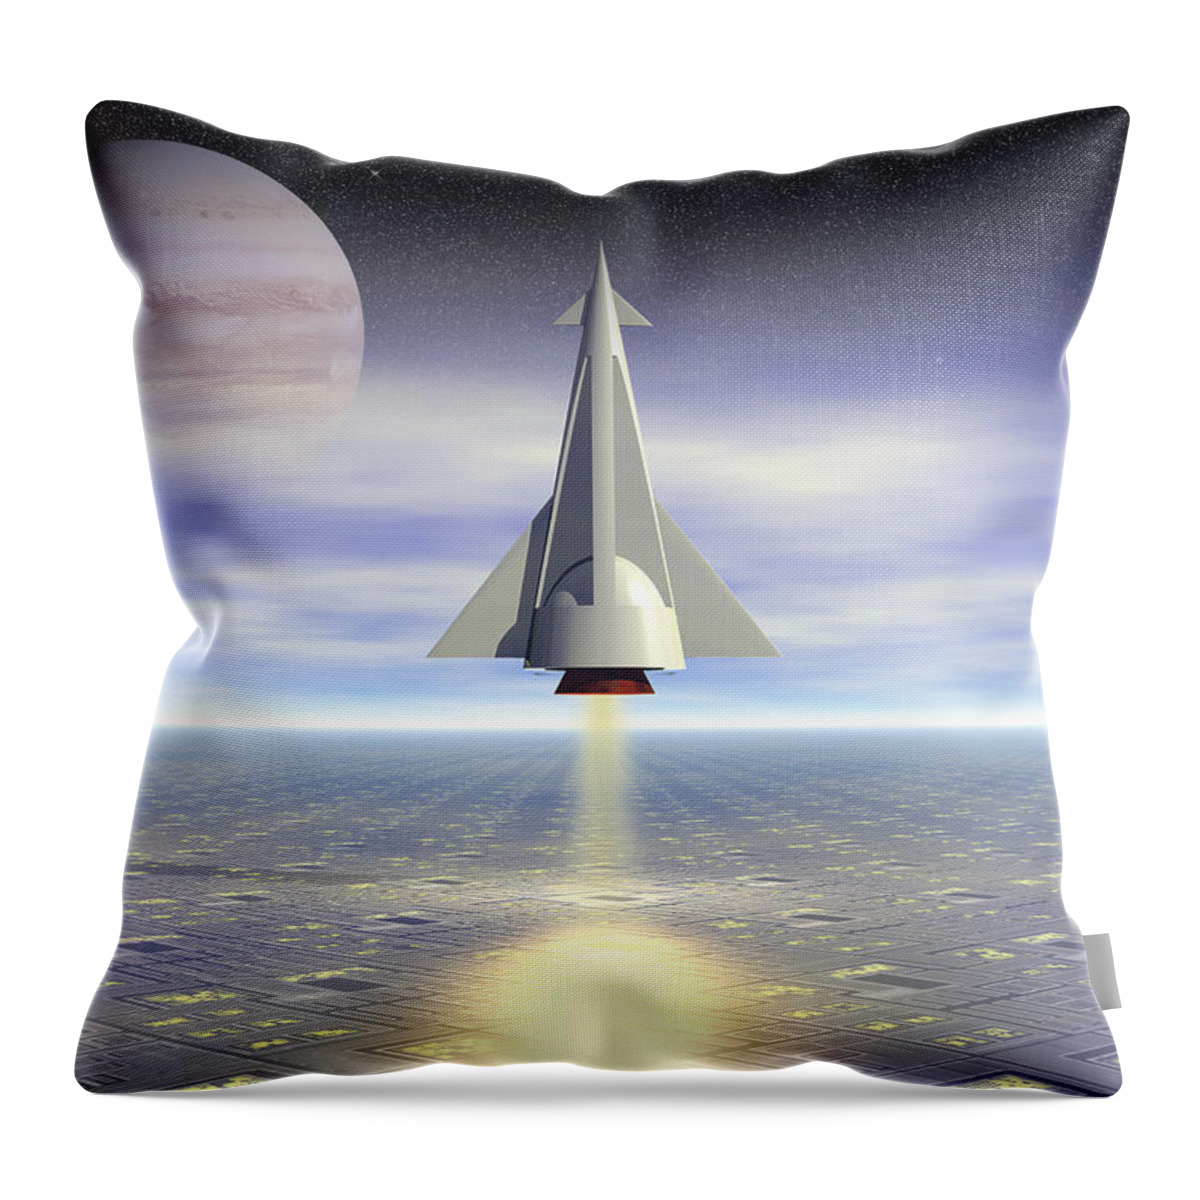 Space Throw Pillow featuring the digital art Rocket Launch by Phil Perkins